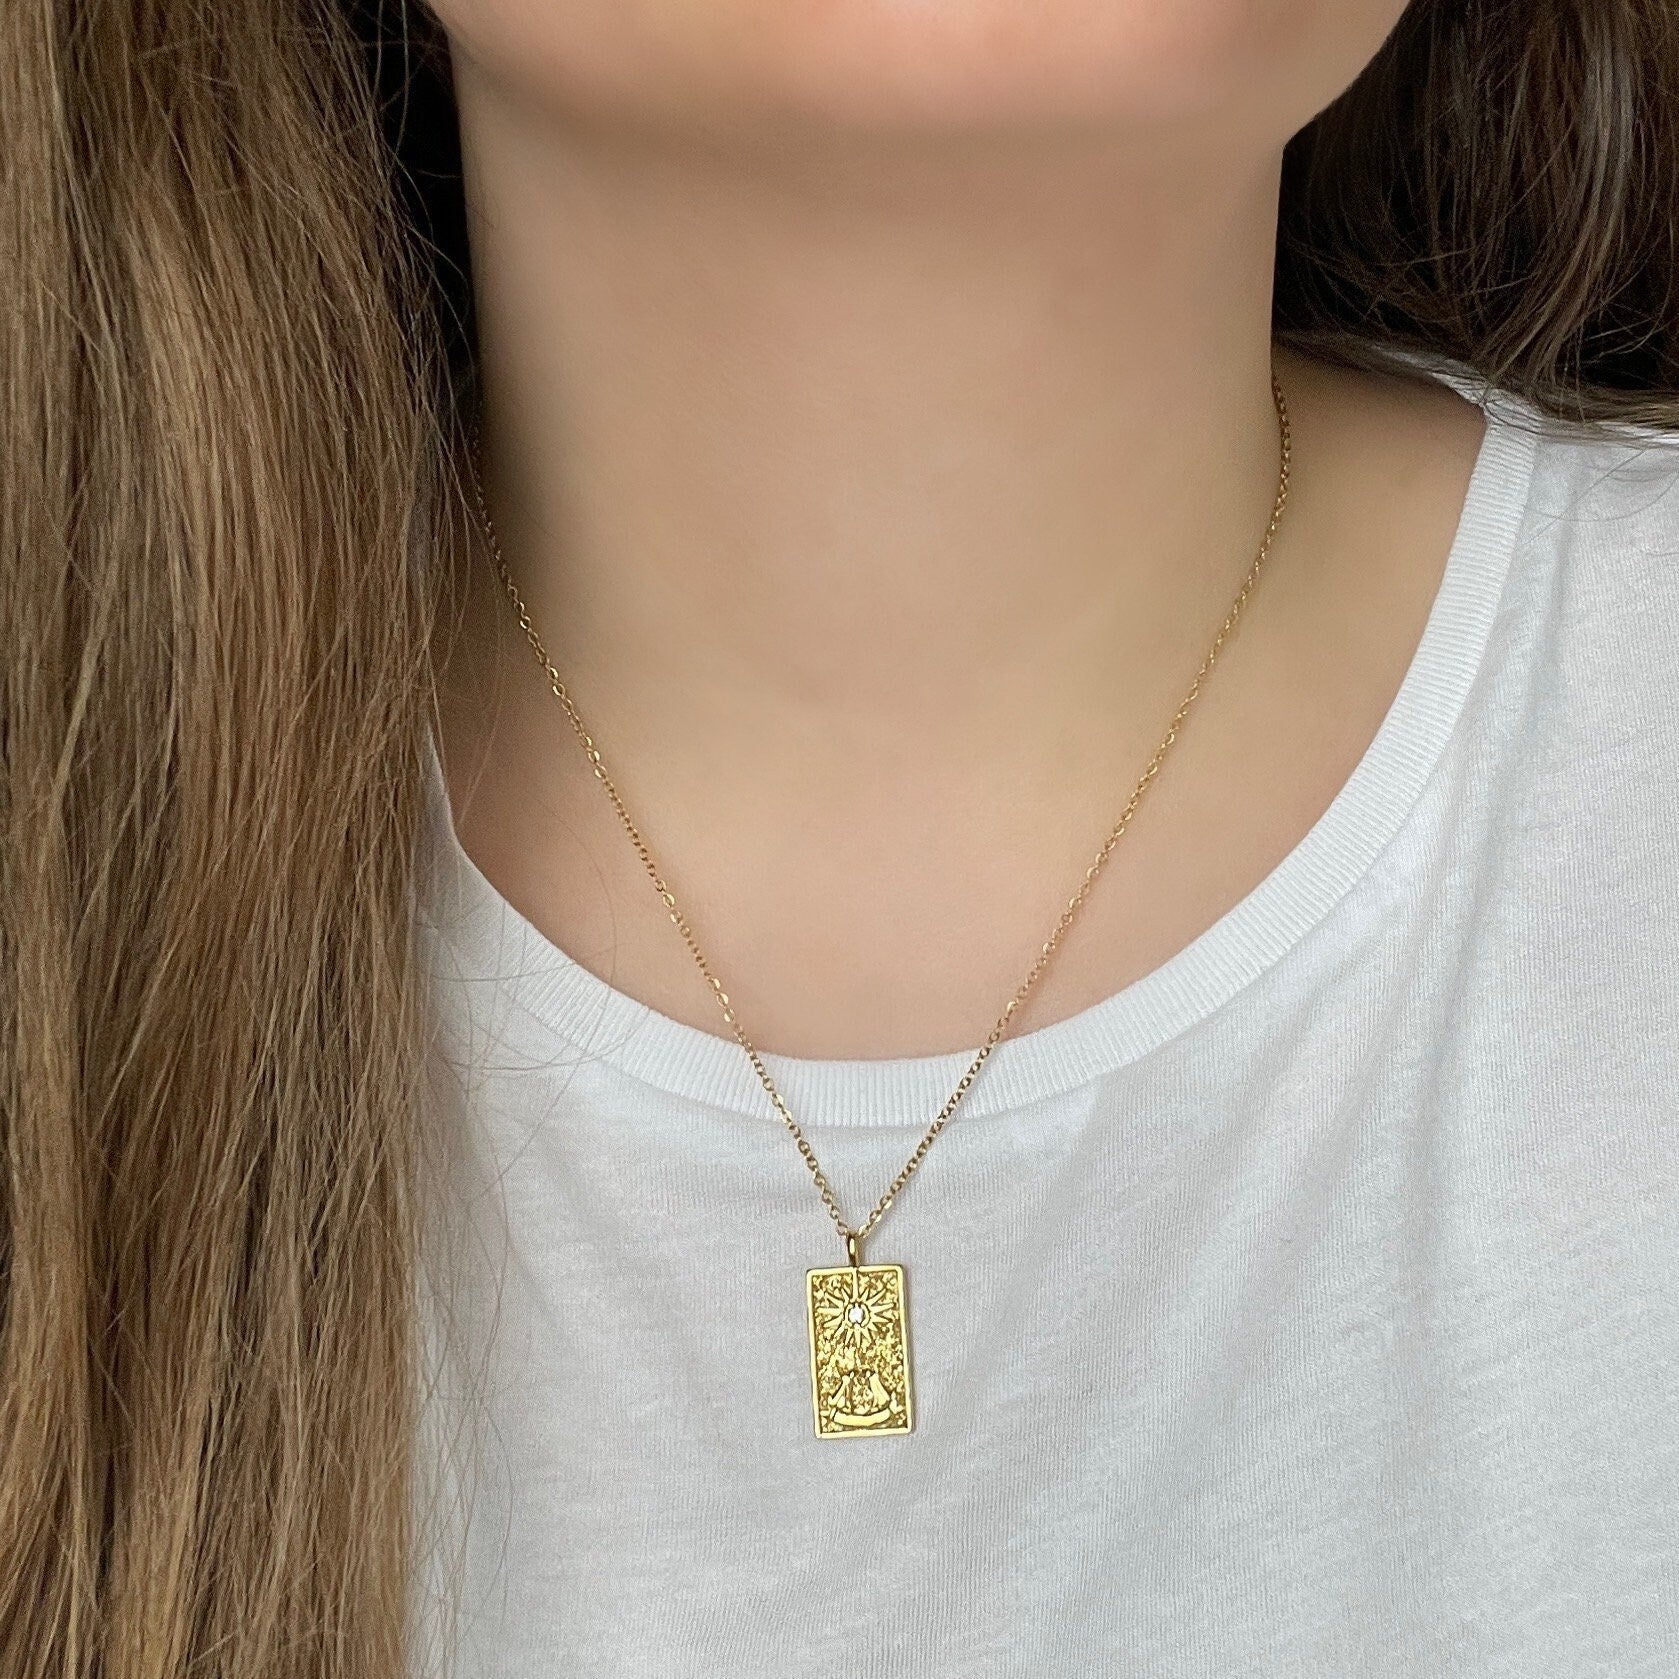 Tarot Card Necklace Gold, Rectangular Charm, Trendy Layer For Women, 18K Gold Stainless Steel, M6-108